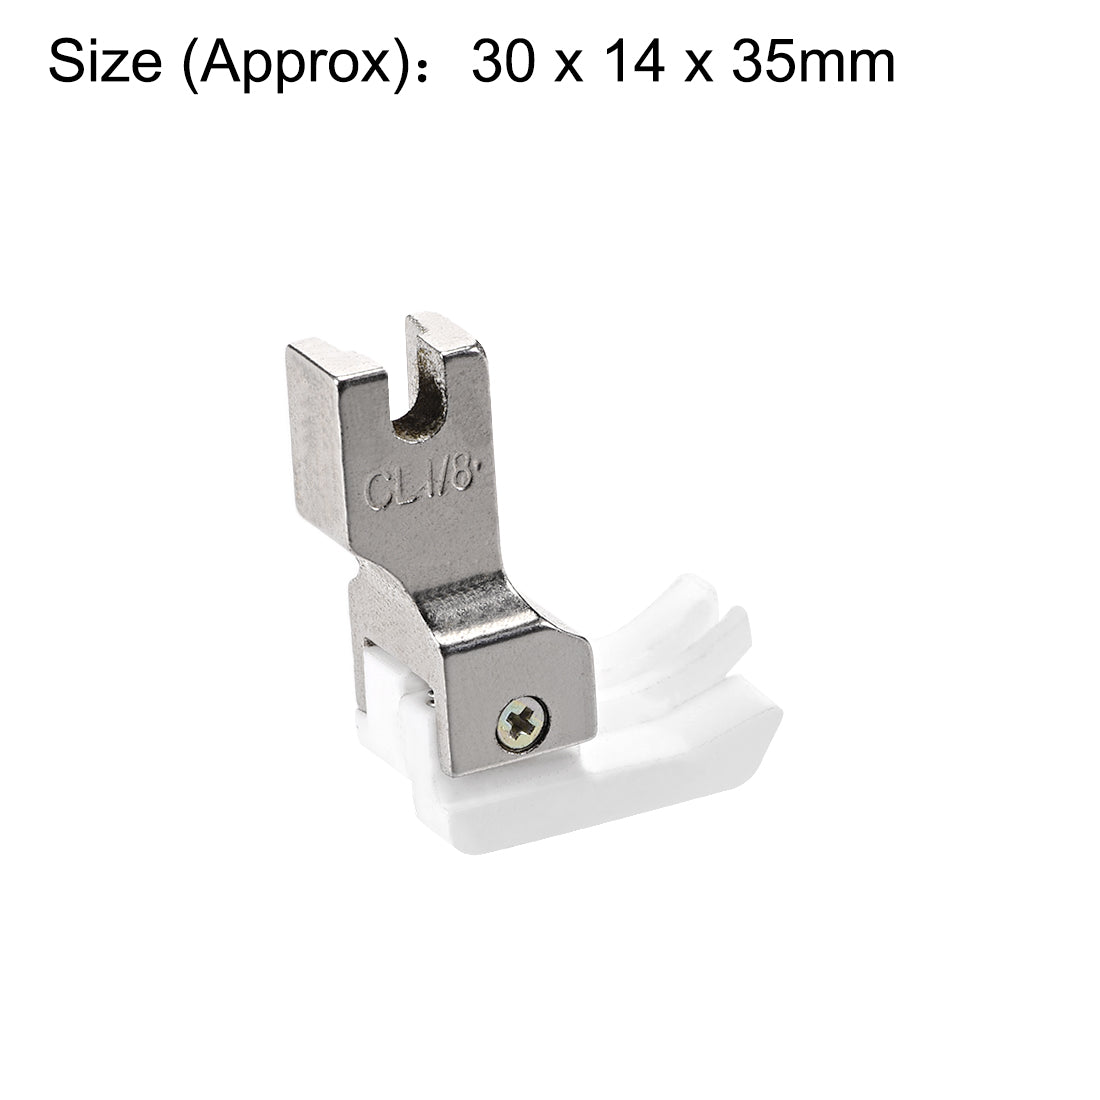 uxcell Uxcell 1/8" Left Side Edge Guide Compensating Presser Foot for Single Needle Industrial Sewing Machines